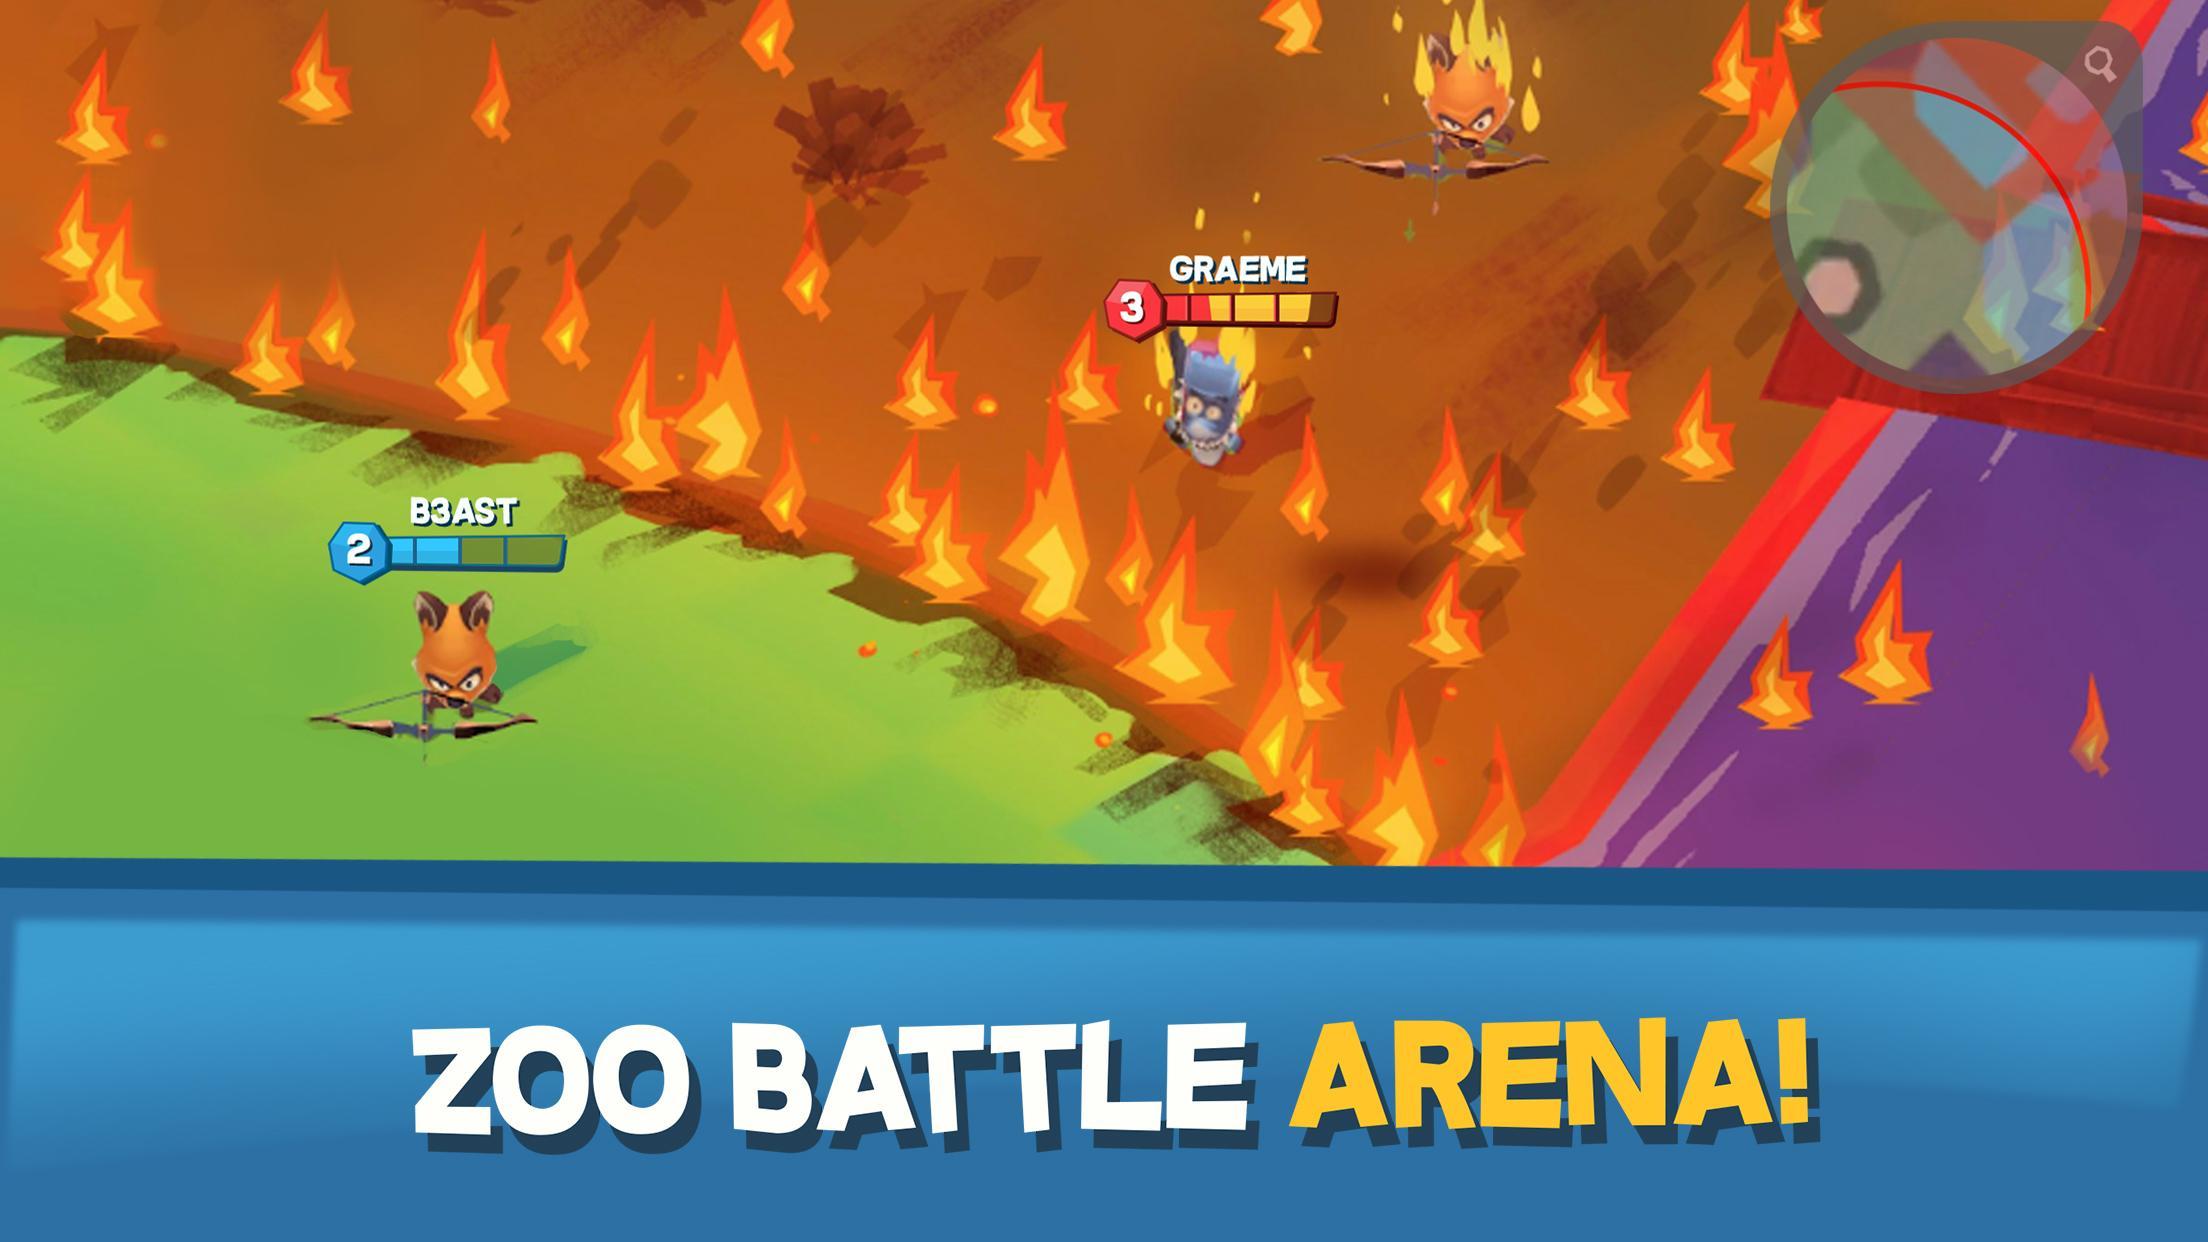 Zooba Free-for-all Zoo Combat Battle Royale Games 2.6 Screenshot 17